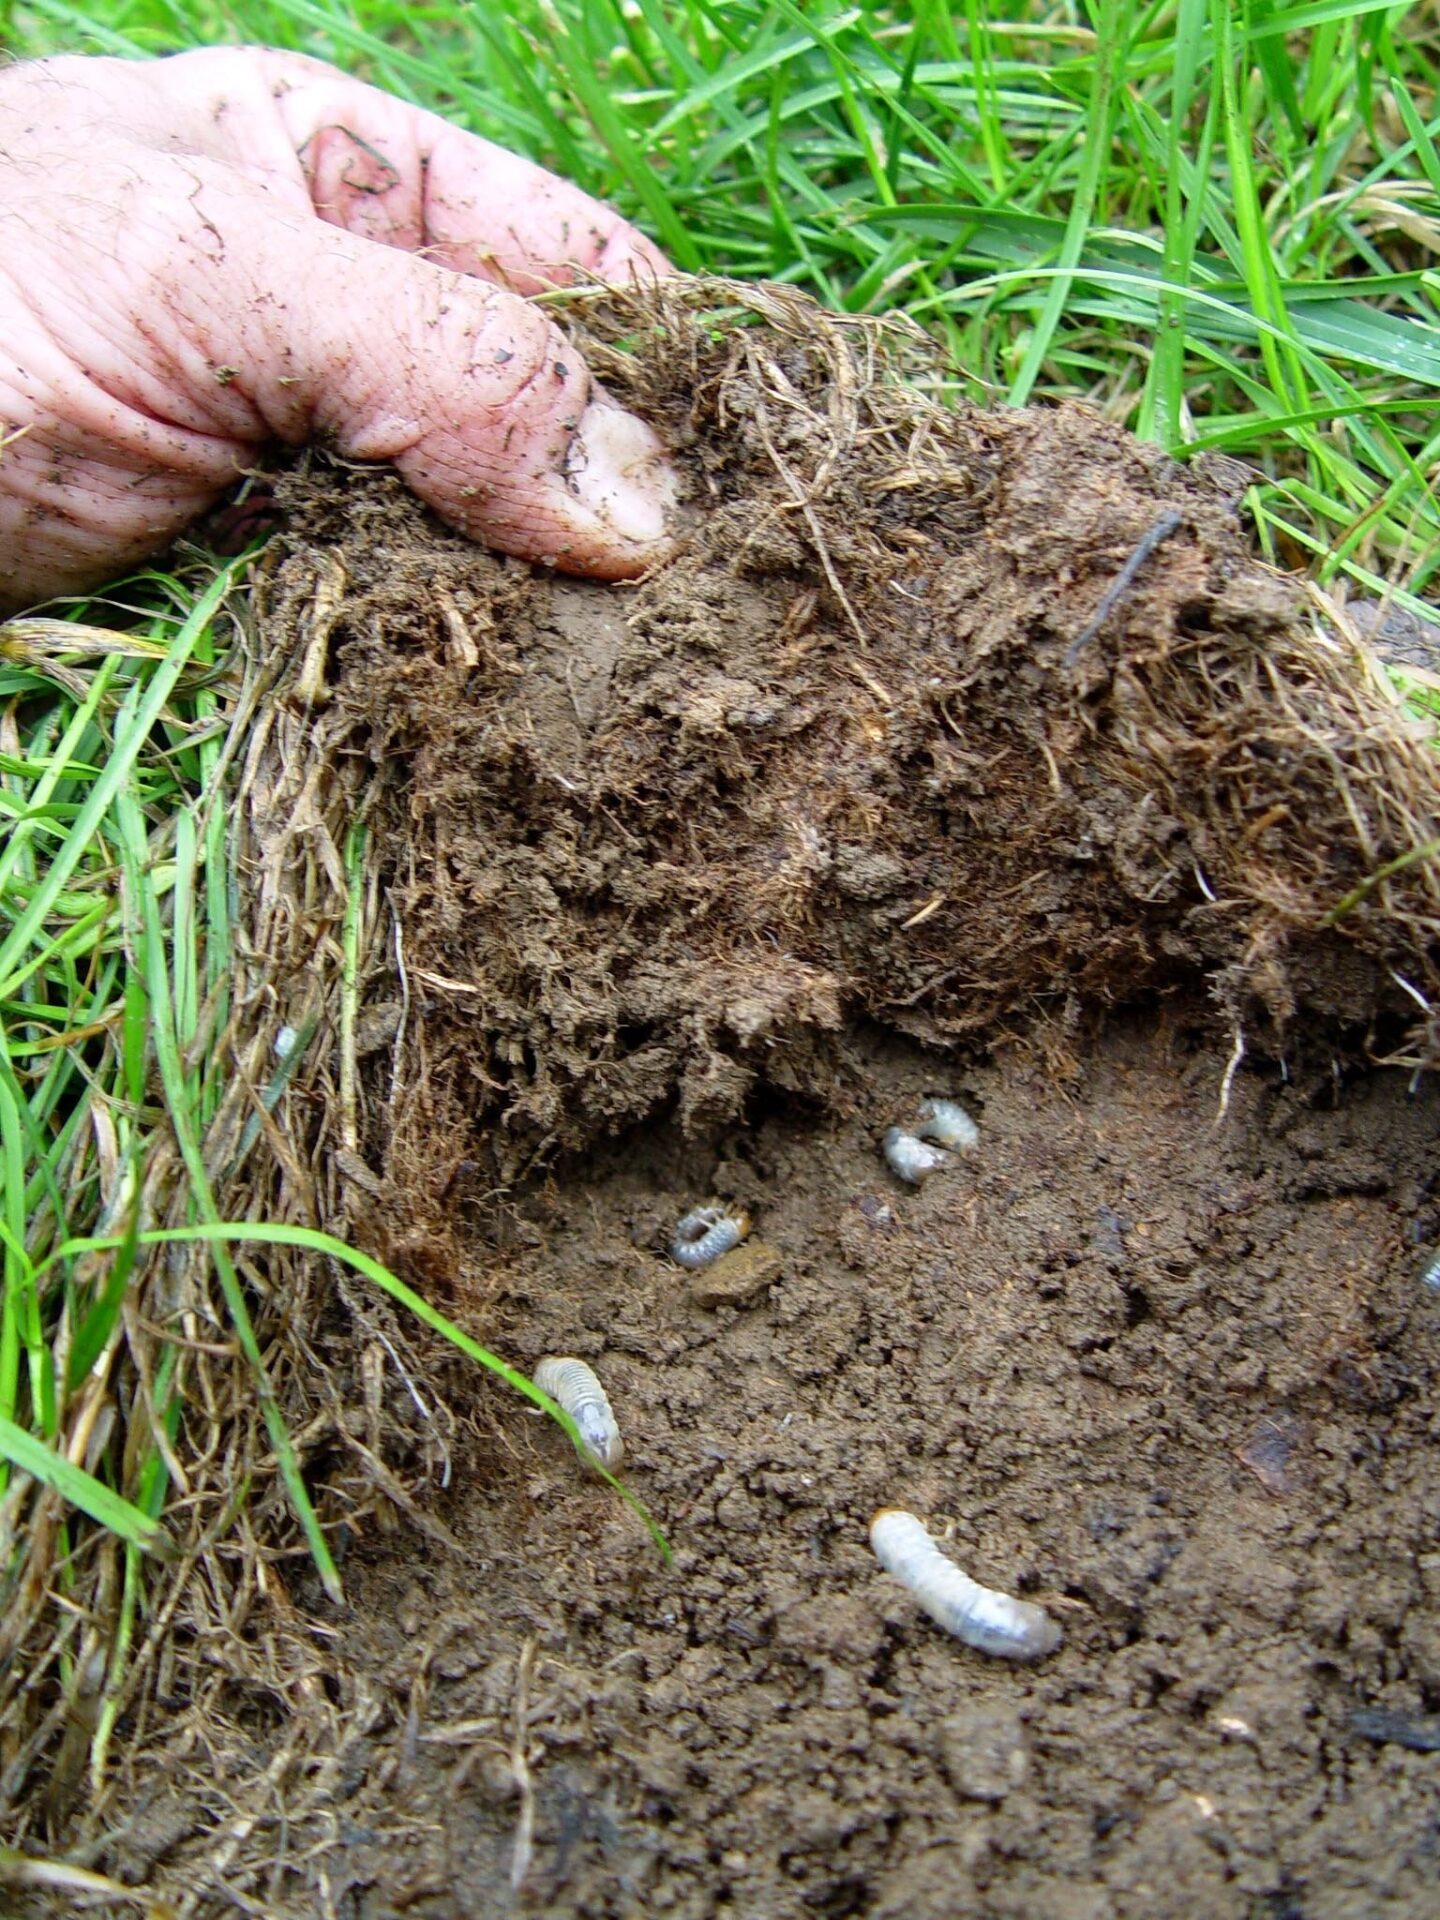 Finding the Best Treatment for Grubs in Your Lawn